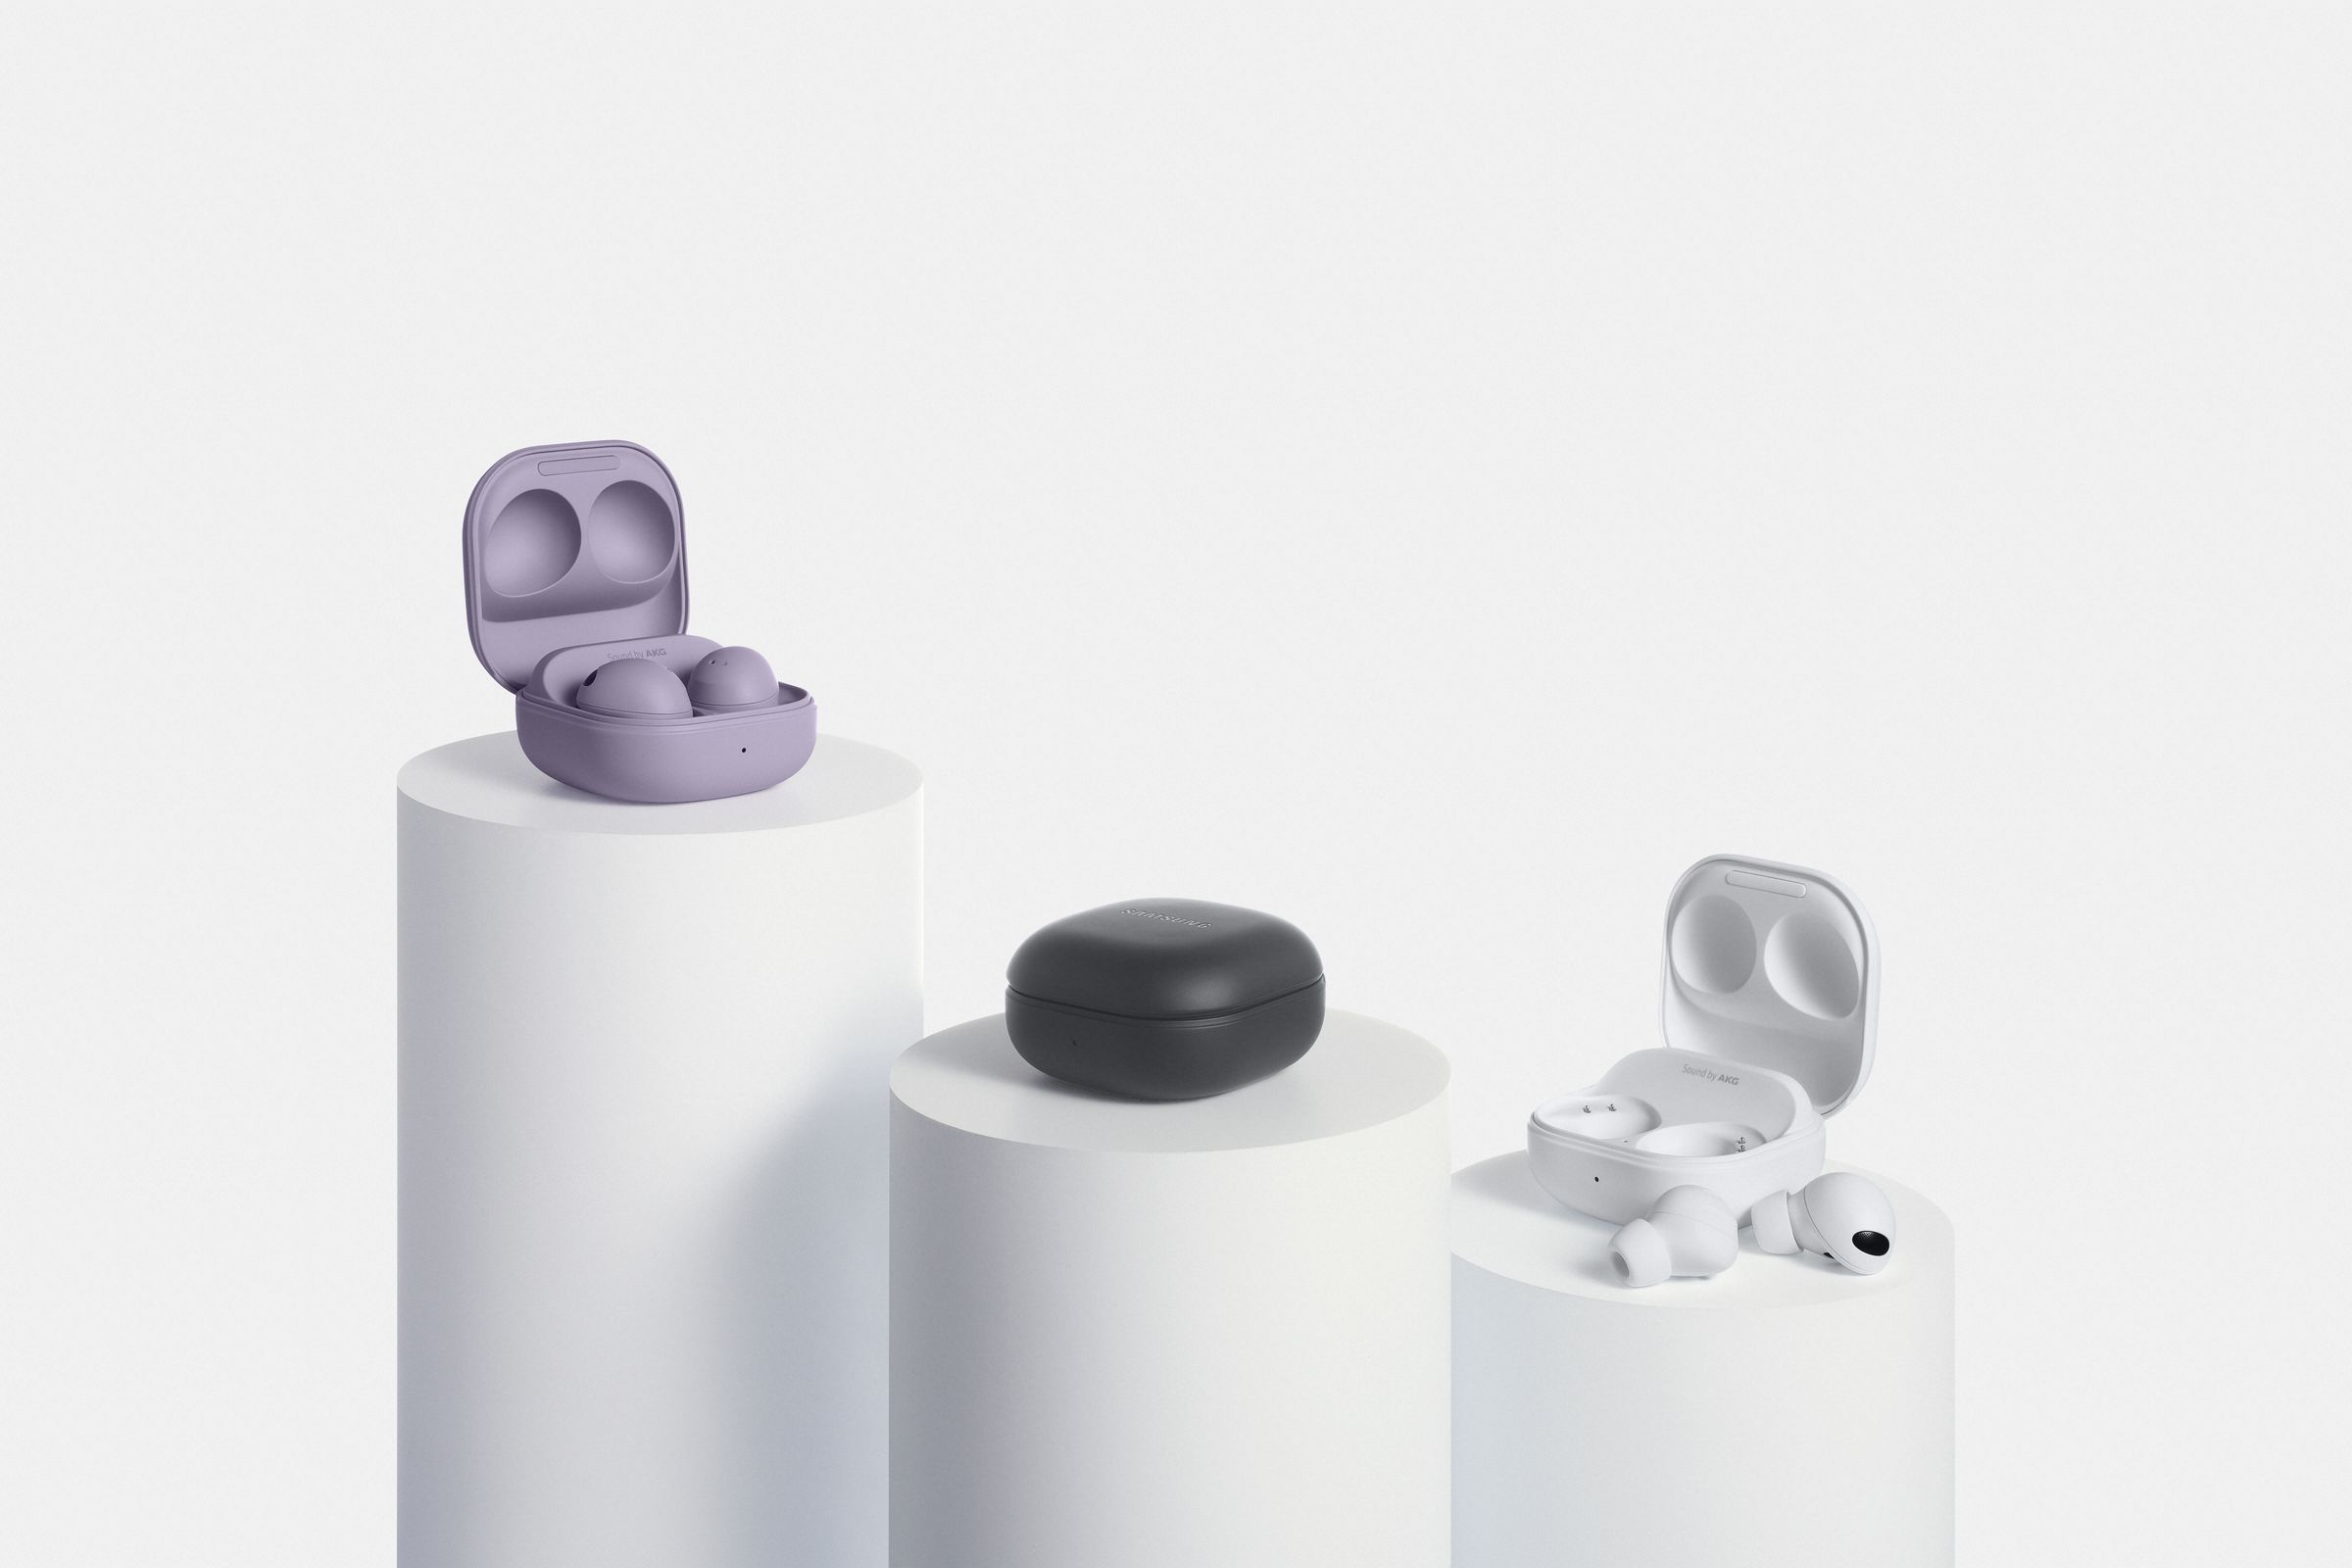 The Galaxy Buds 2 Pro are available with a matte finish this time around.